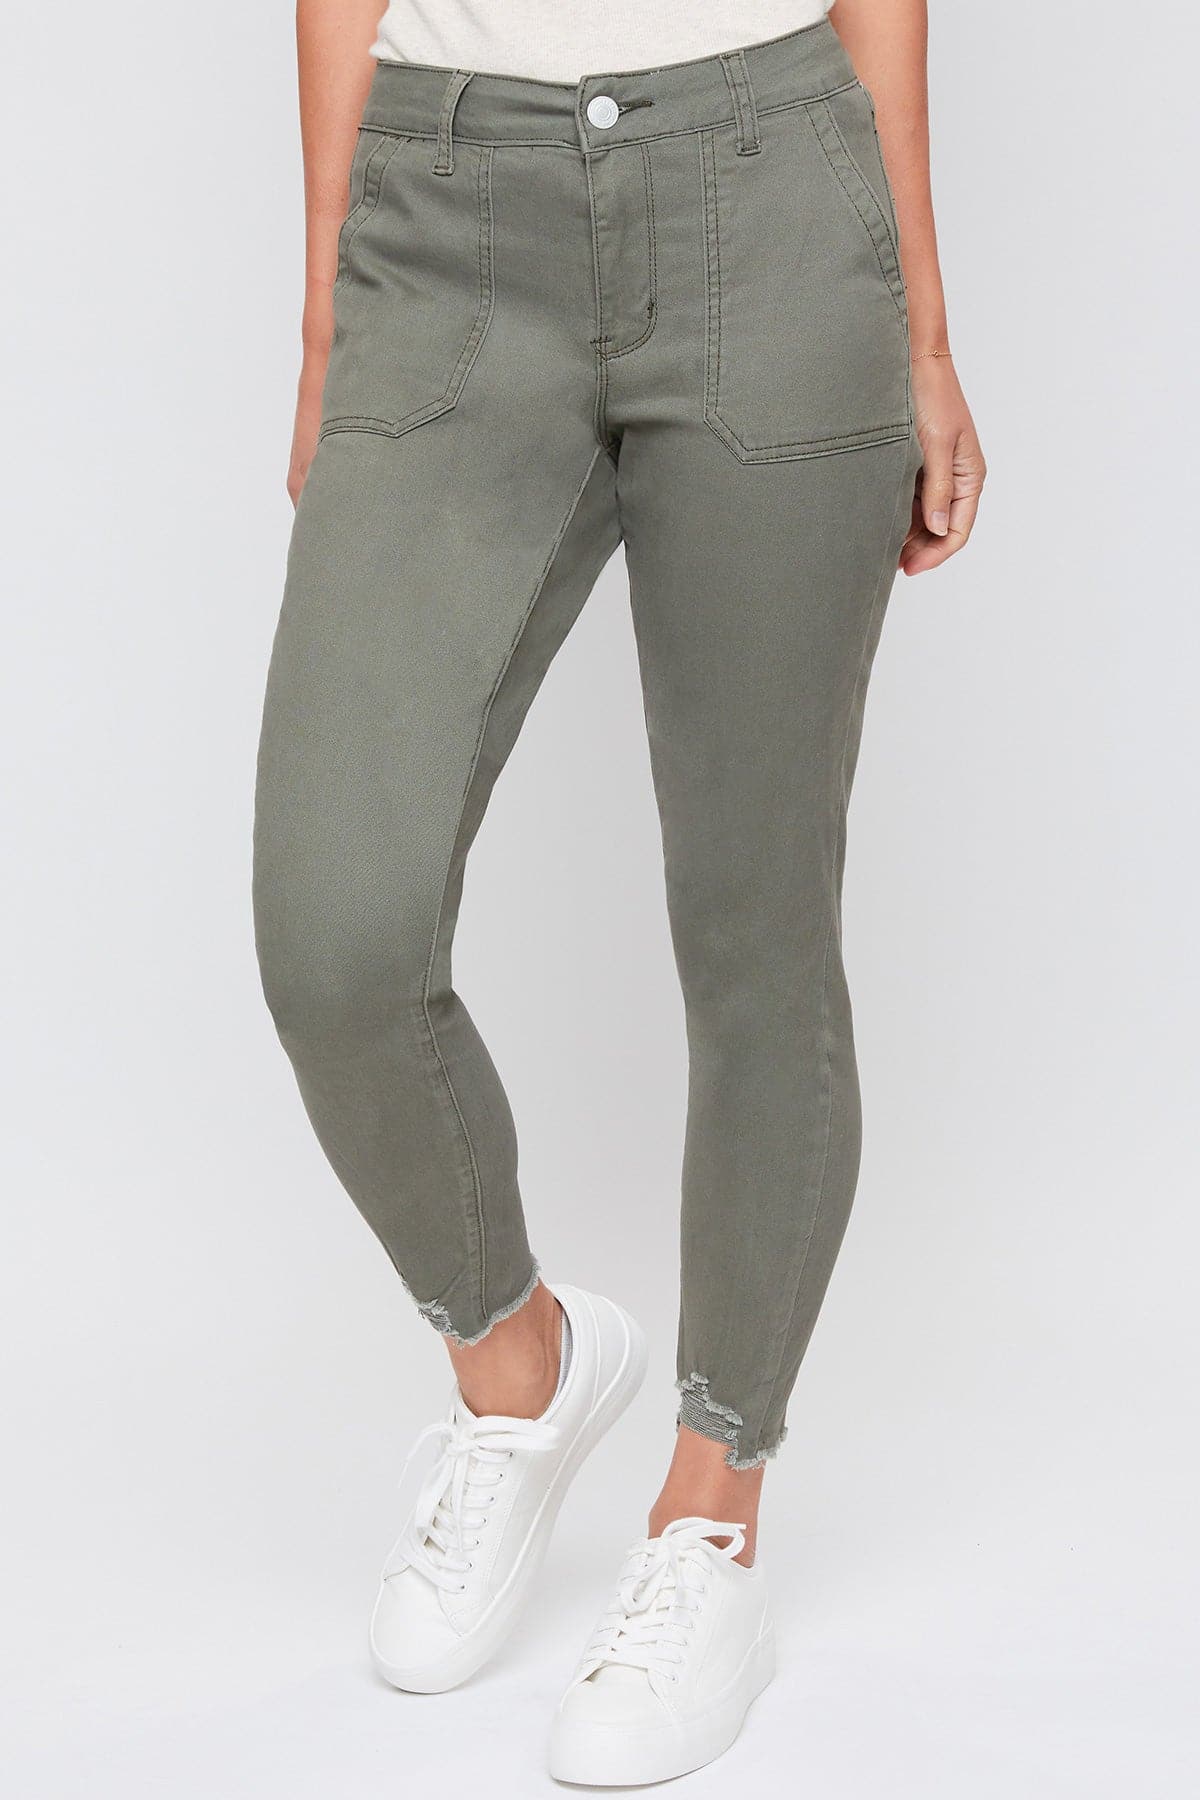 Women's Mid Rise Ankle Jean with Patch Pockets